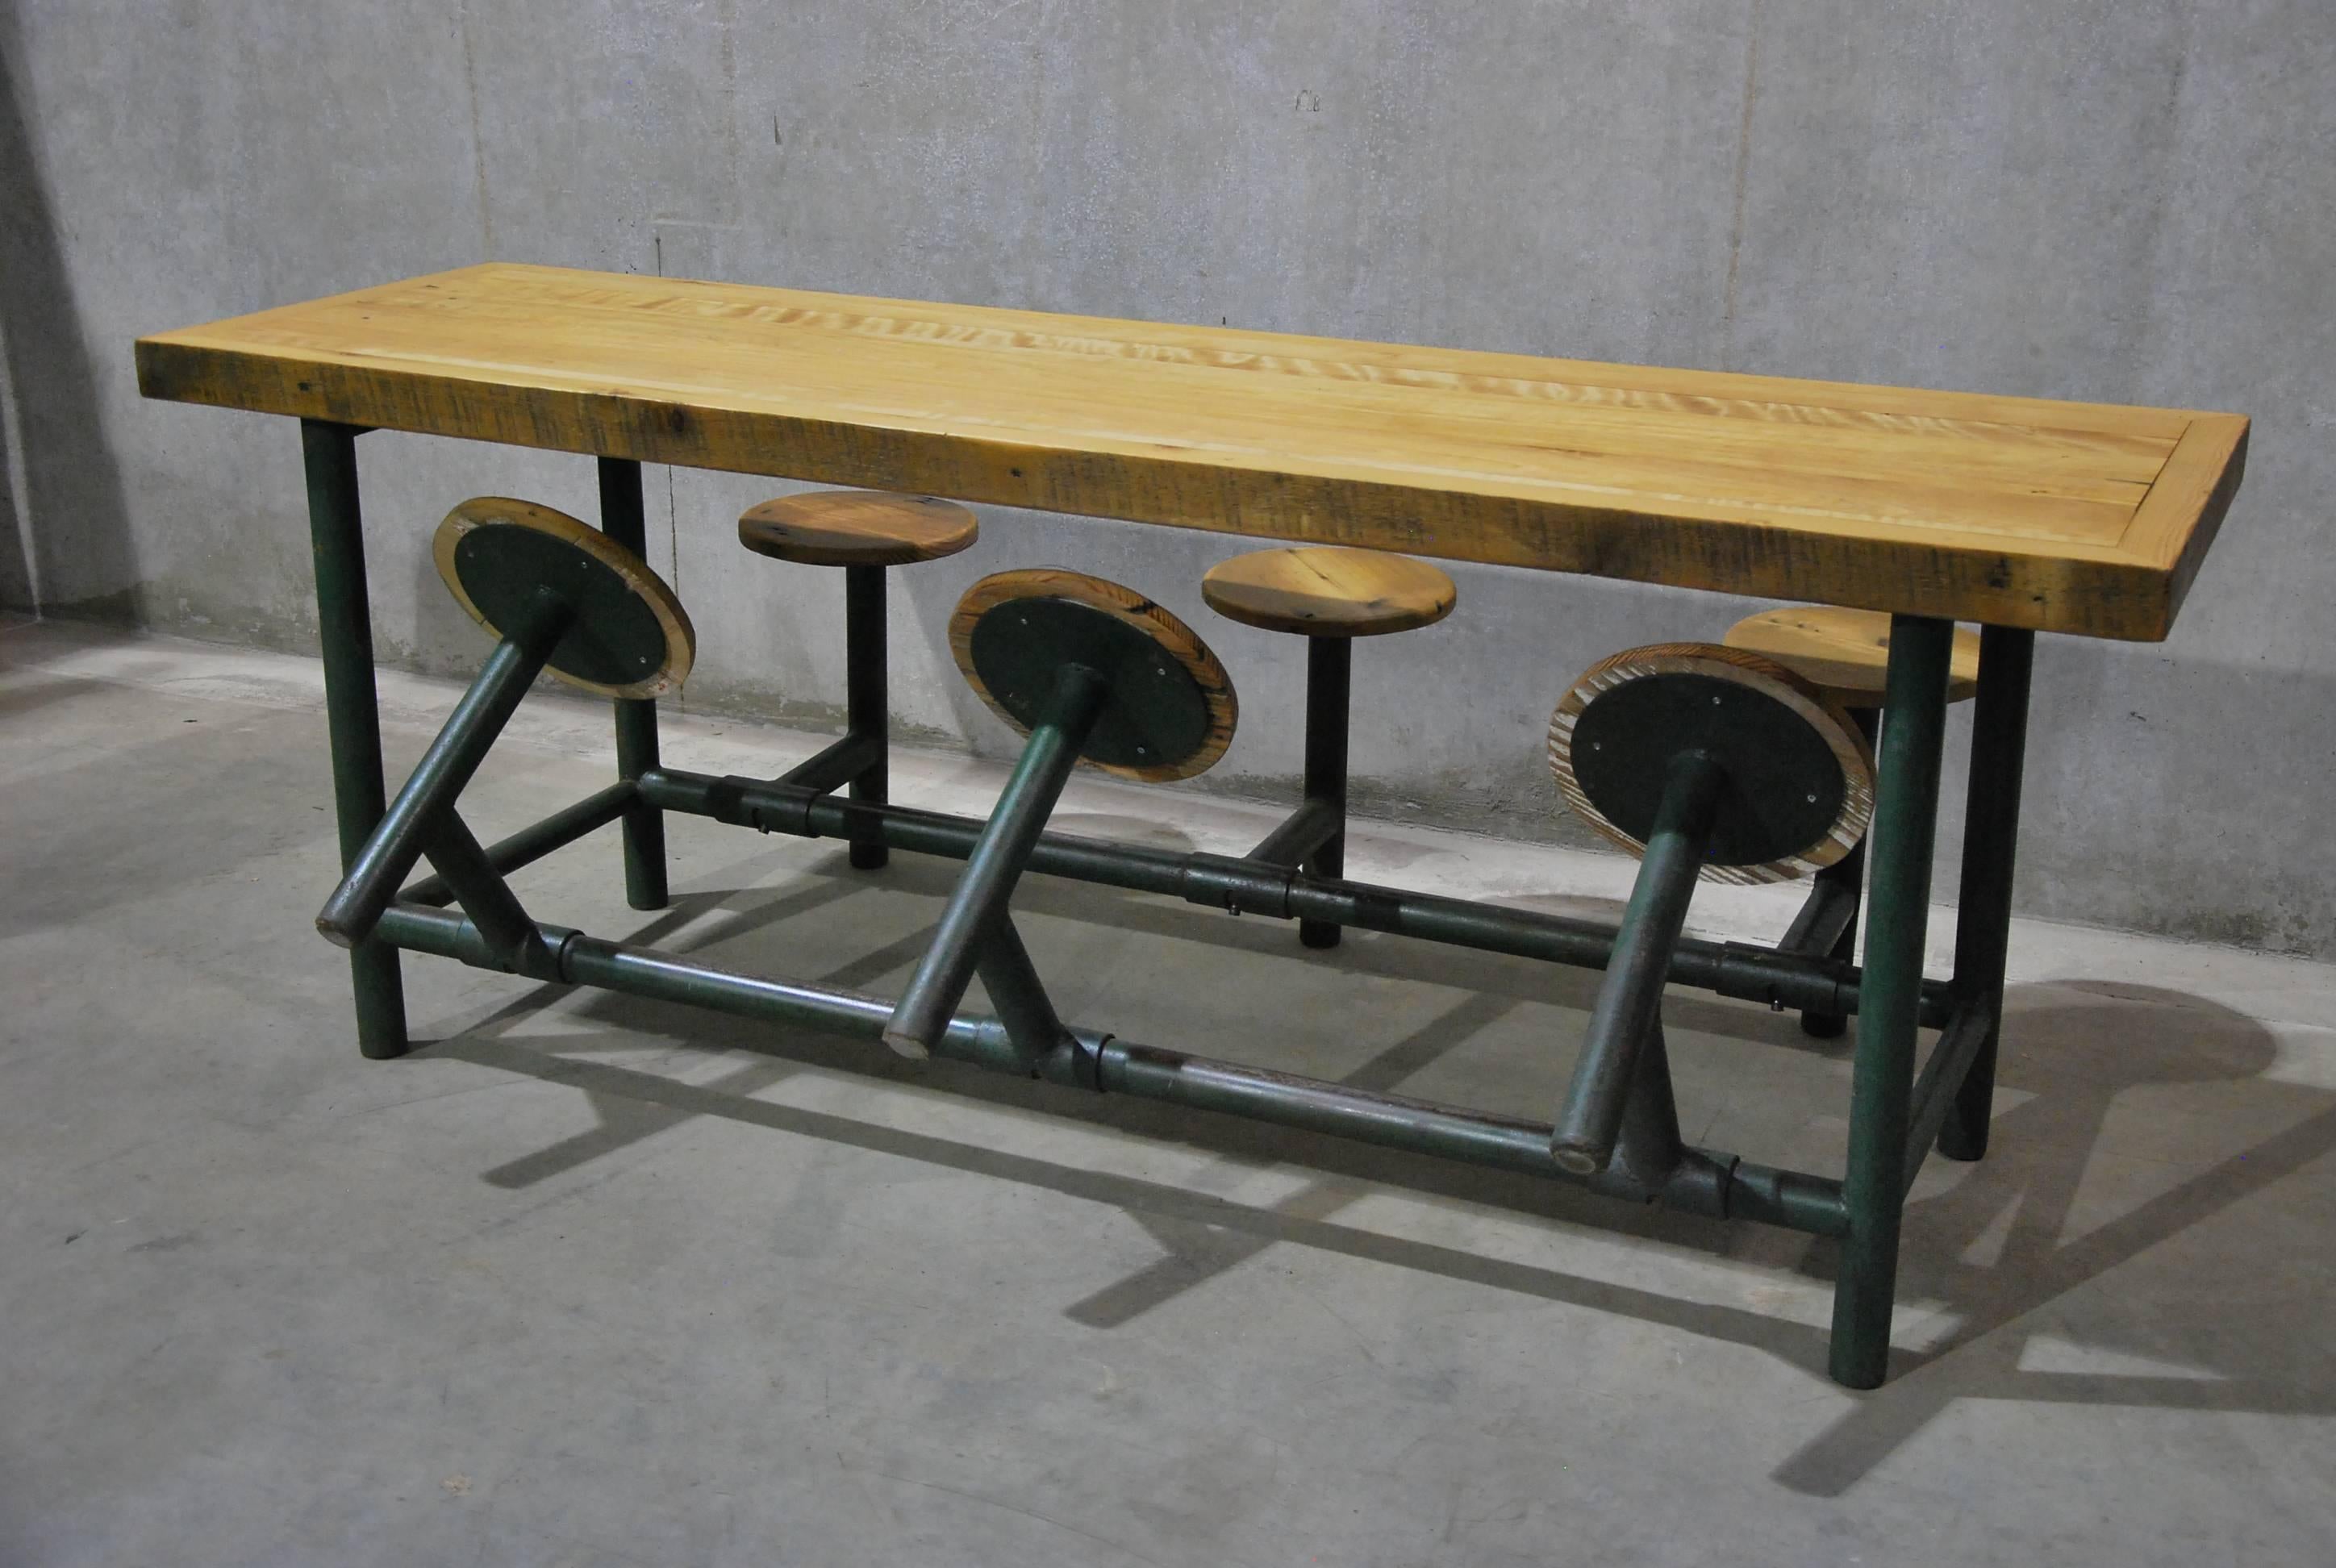 Great solid six-seat with wooden seats and solid maple top. This antique American Industrial, circa 1930s stationary six-seat factory table was salvaged from told Chicago factory. This unique and Minimalist table is comprised largely of heavy gauge